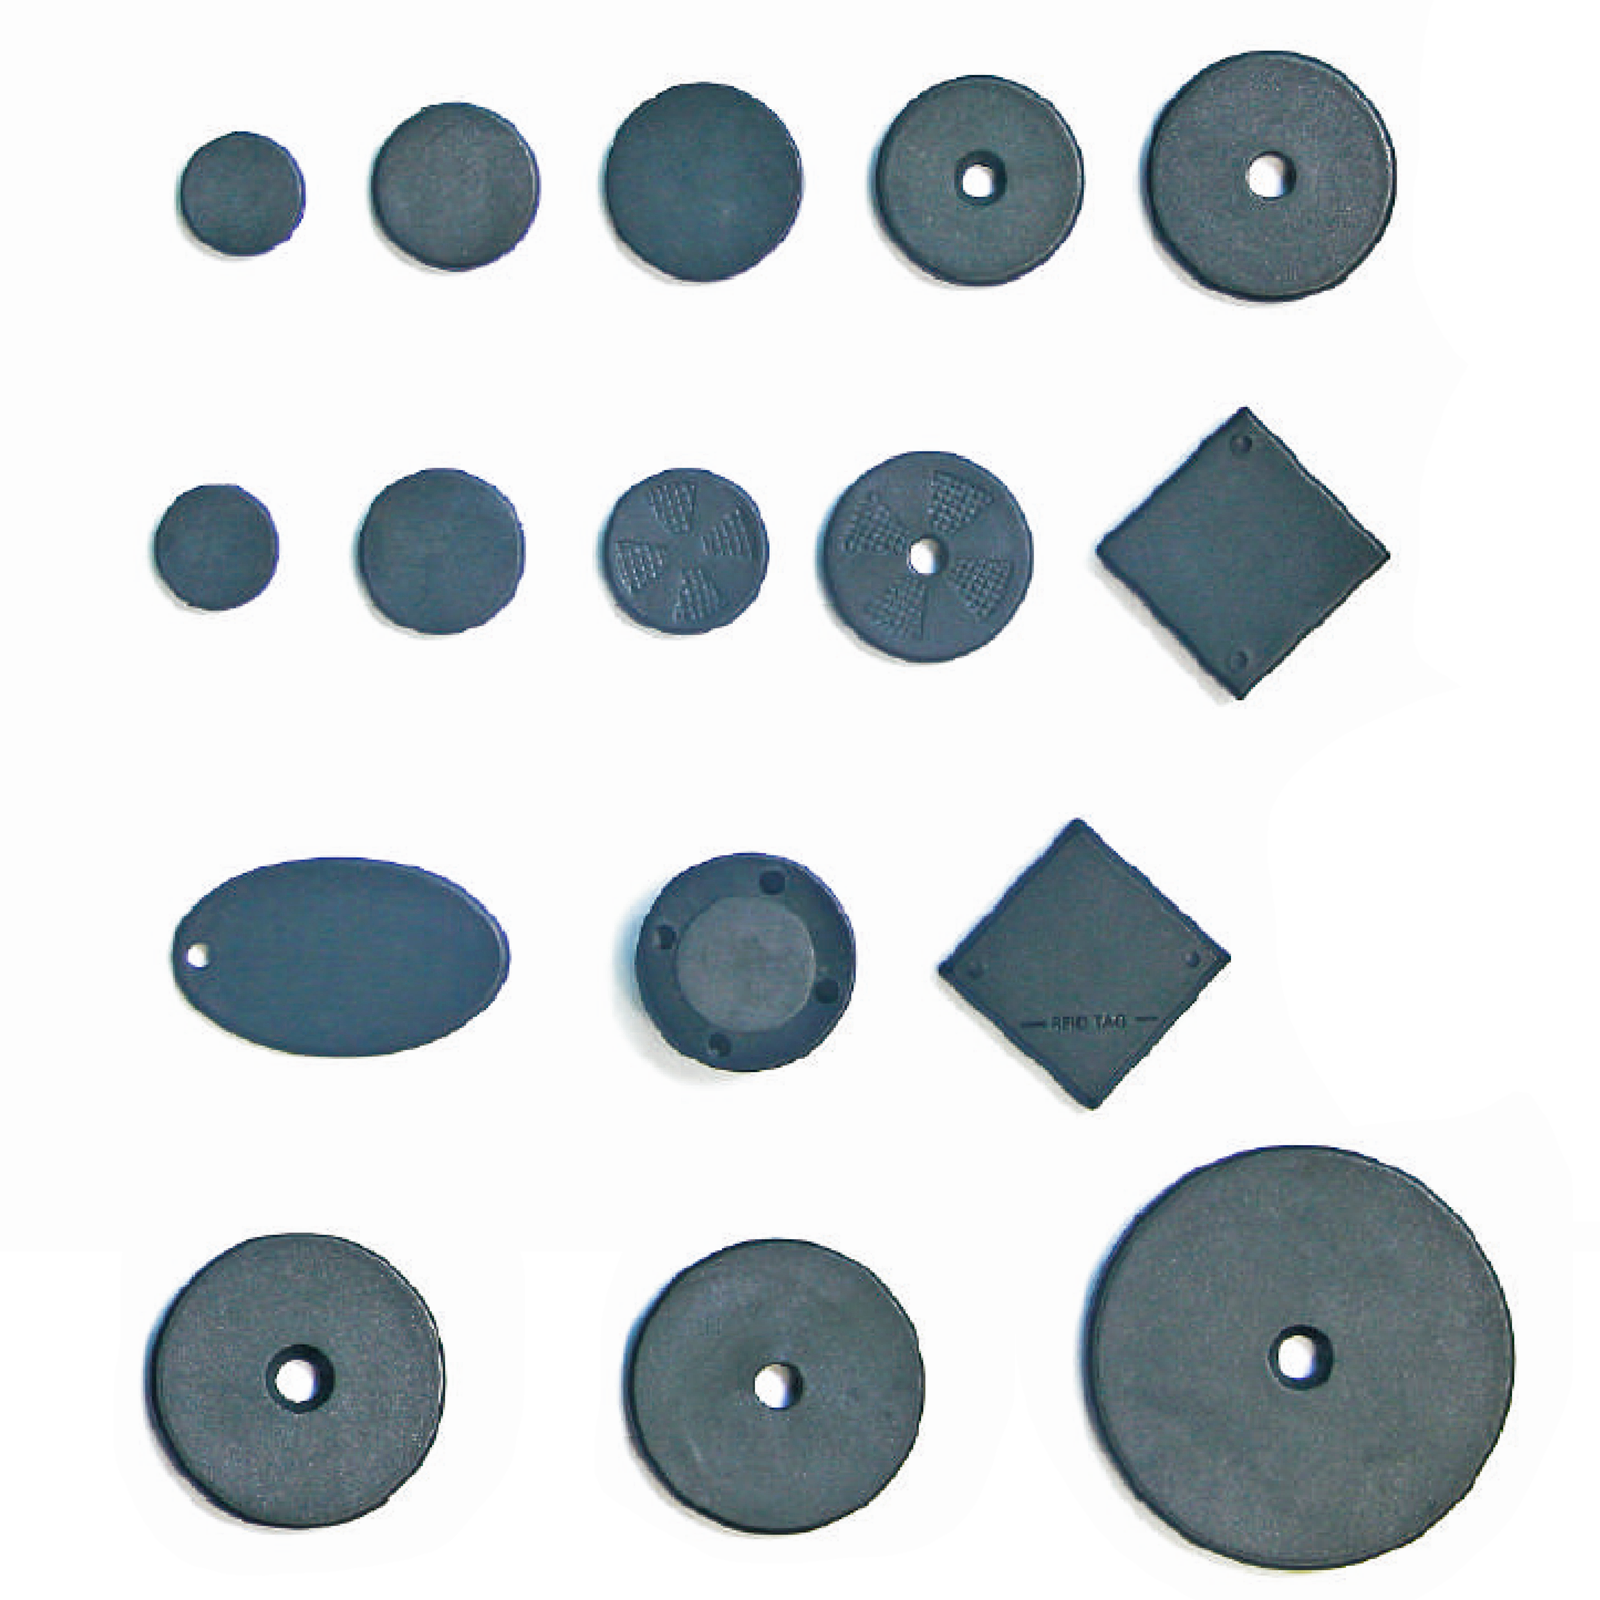 100pcs RFID High Temperature Resistant Button Label Waterproof RFID Tag for Industrial Management